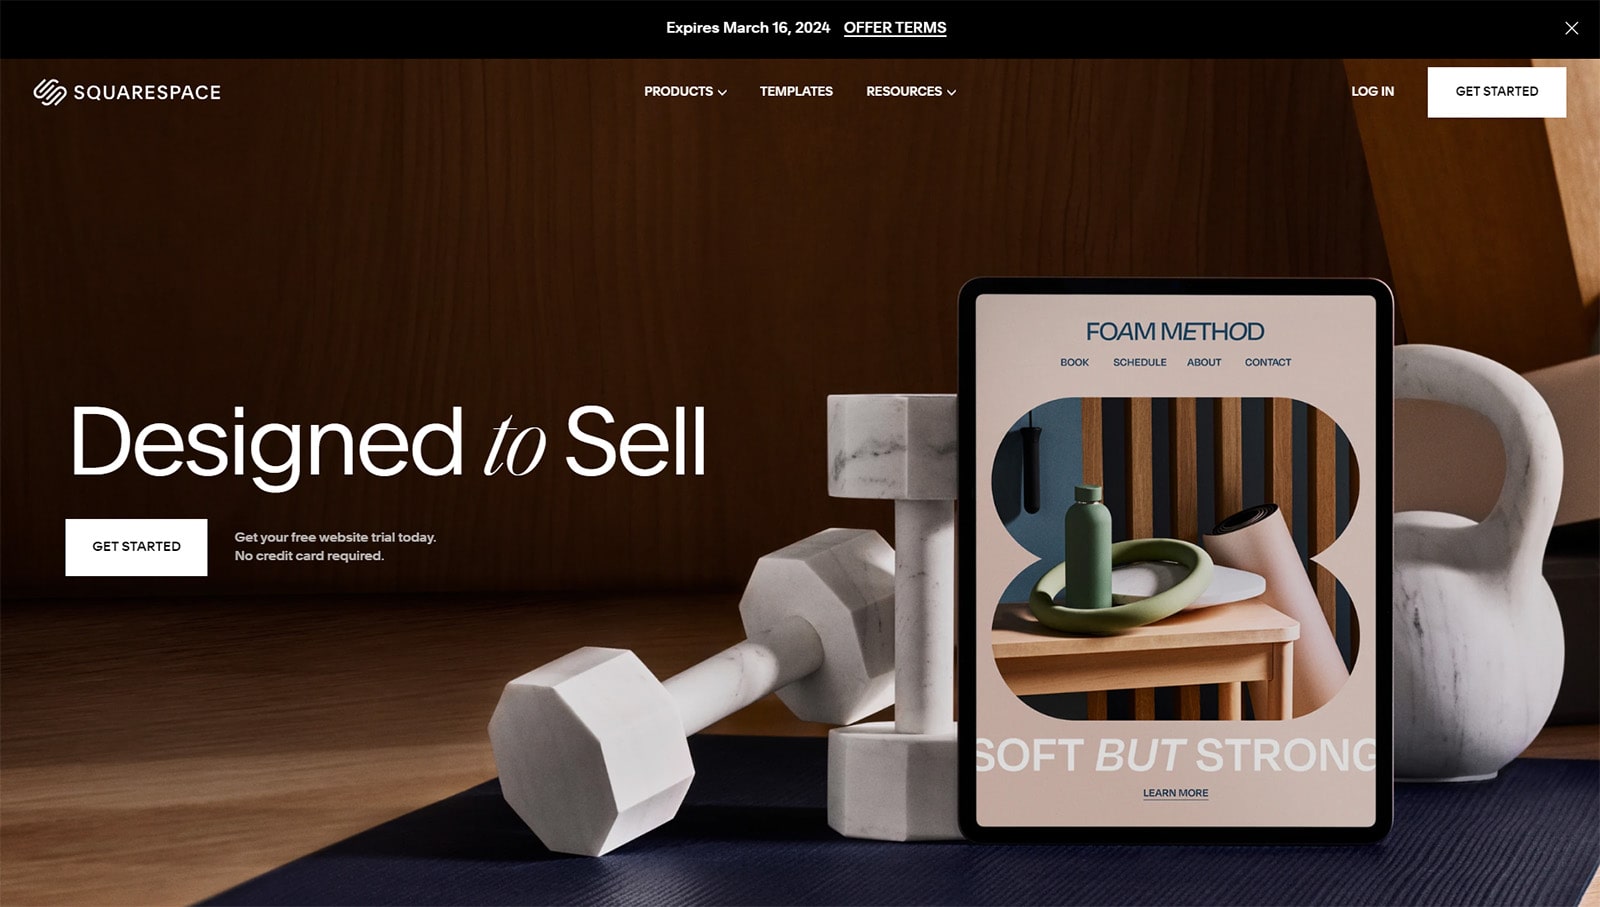 Photograph of Squarespace, a hotel website builder with built-in digital marketing tools.